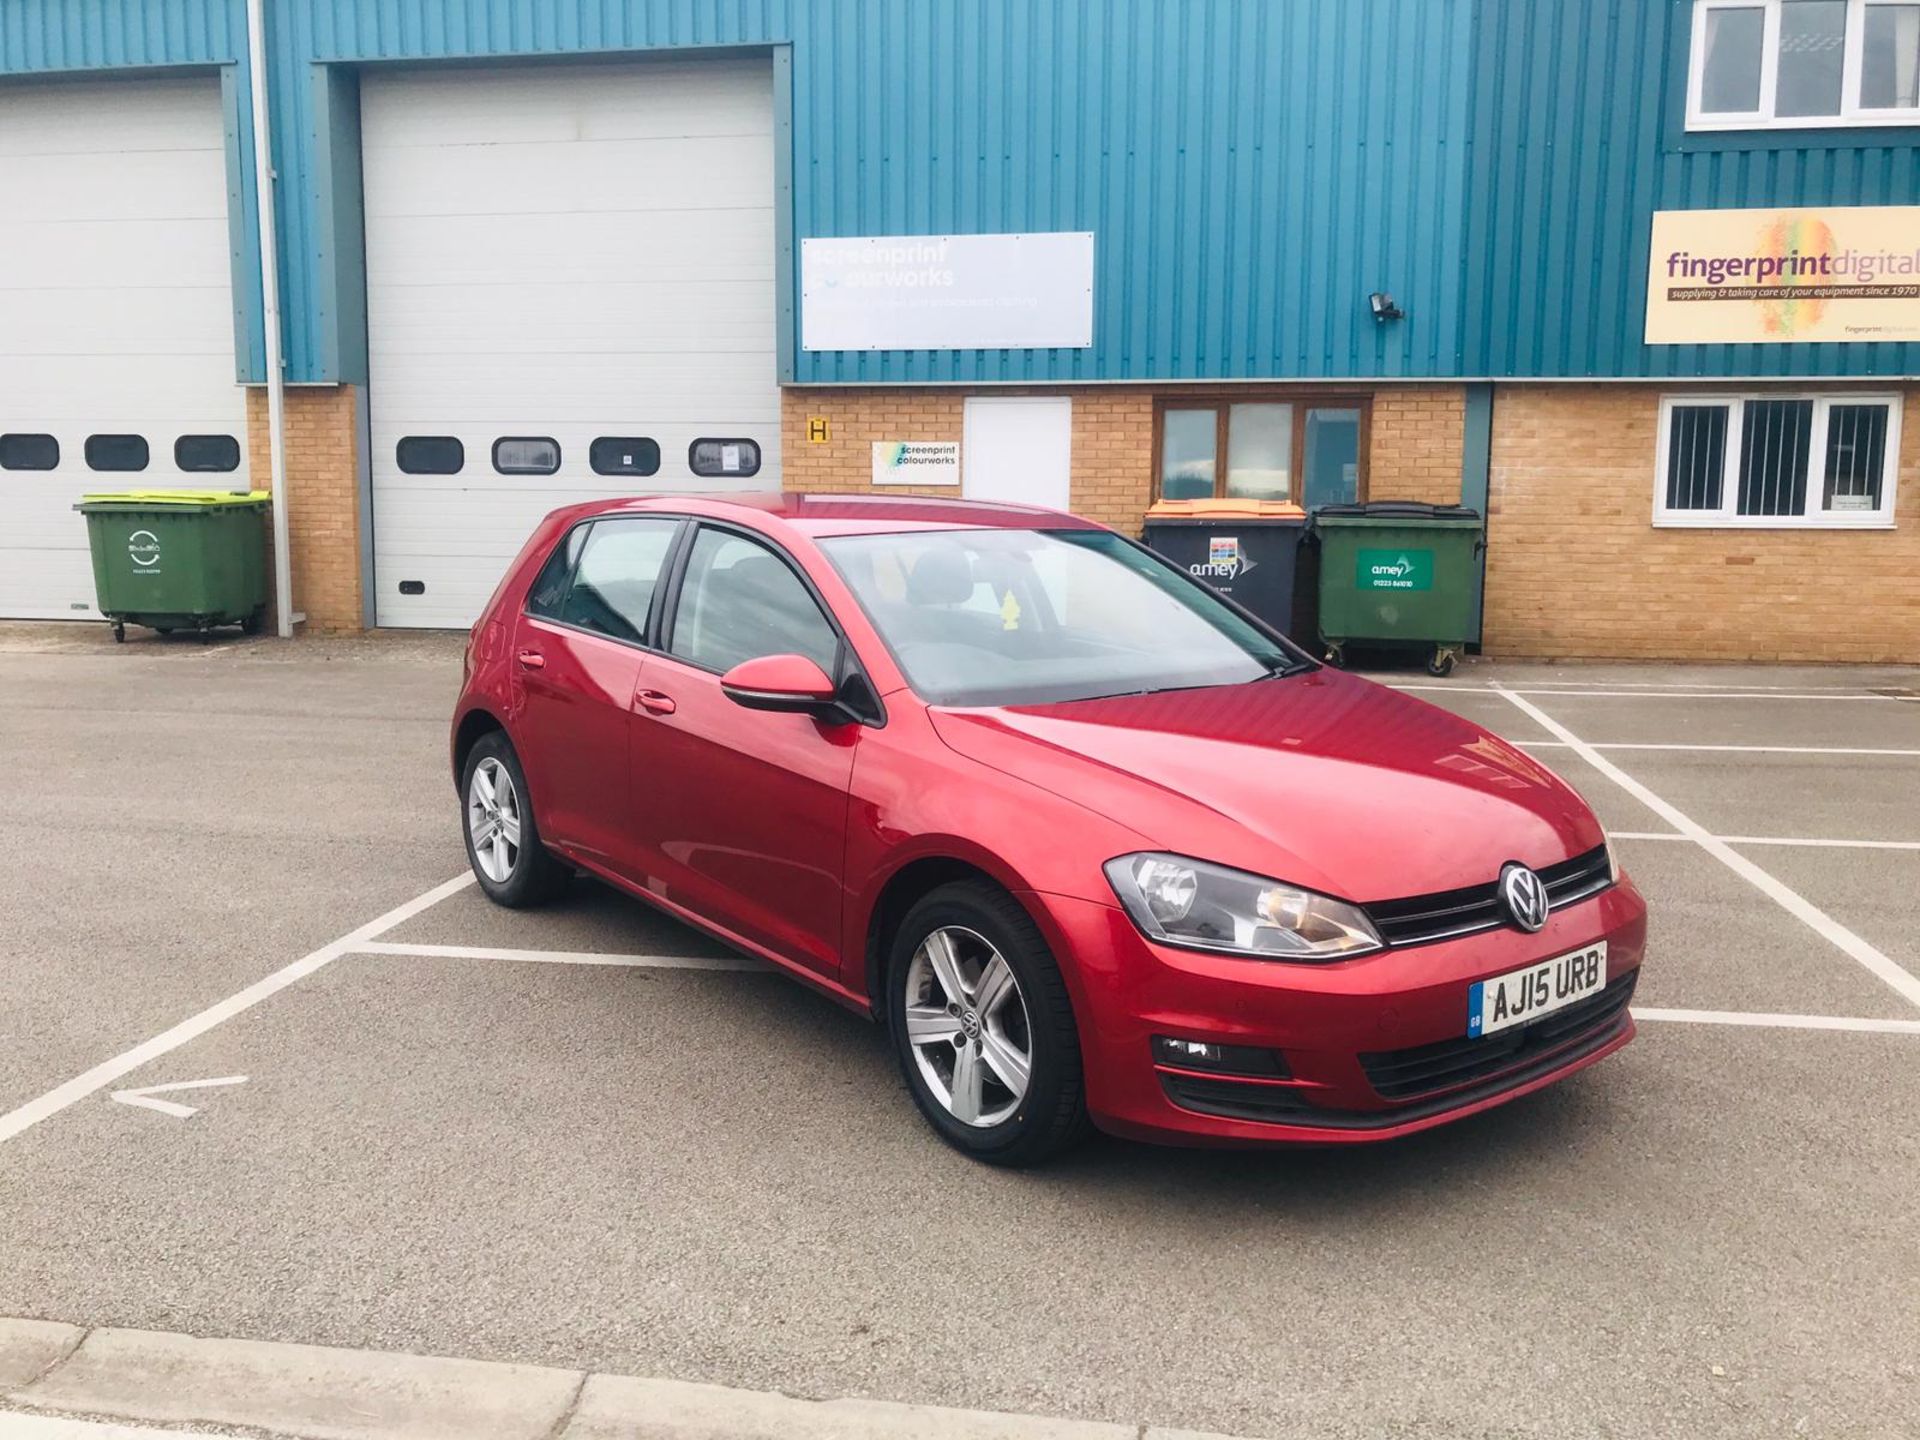 VW Golf Match 1.6 TDI BMT Automatic - 2015 15 Reg - 1 Keeper From New - Parking Sensors - Image 2 of 30